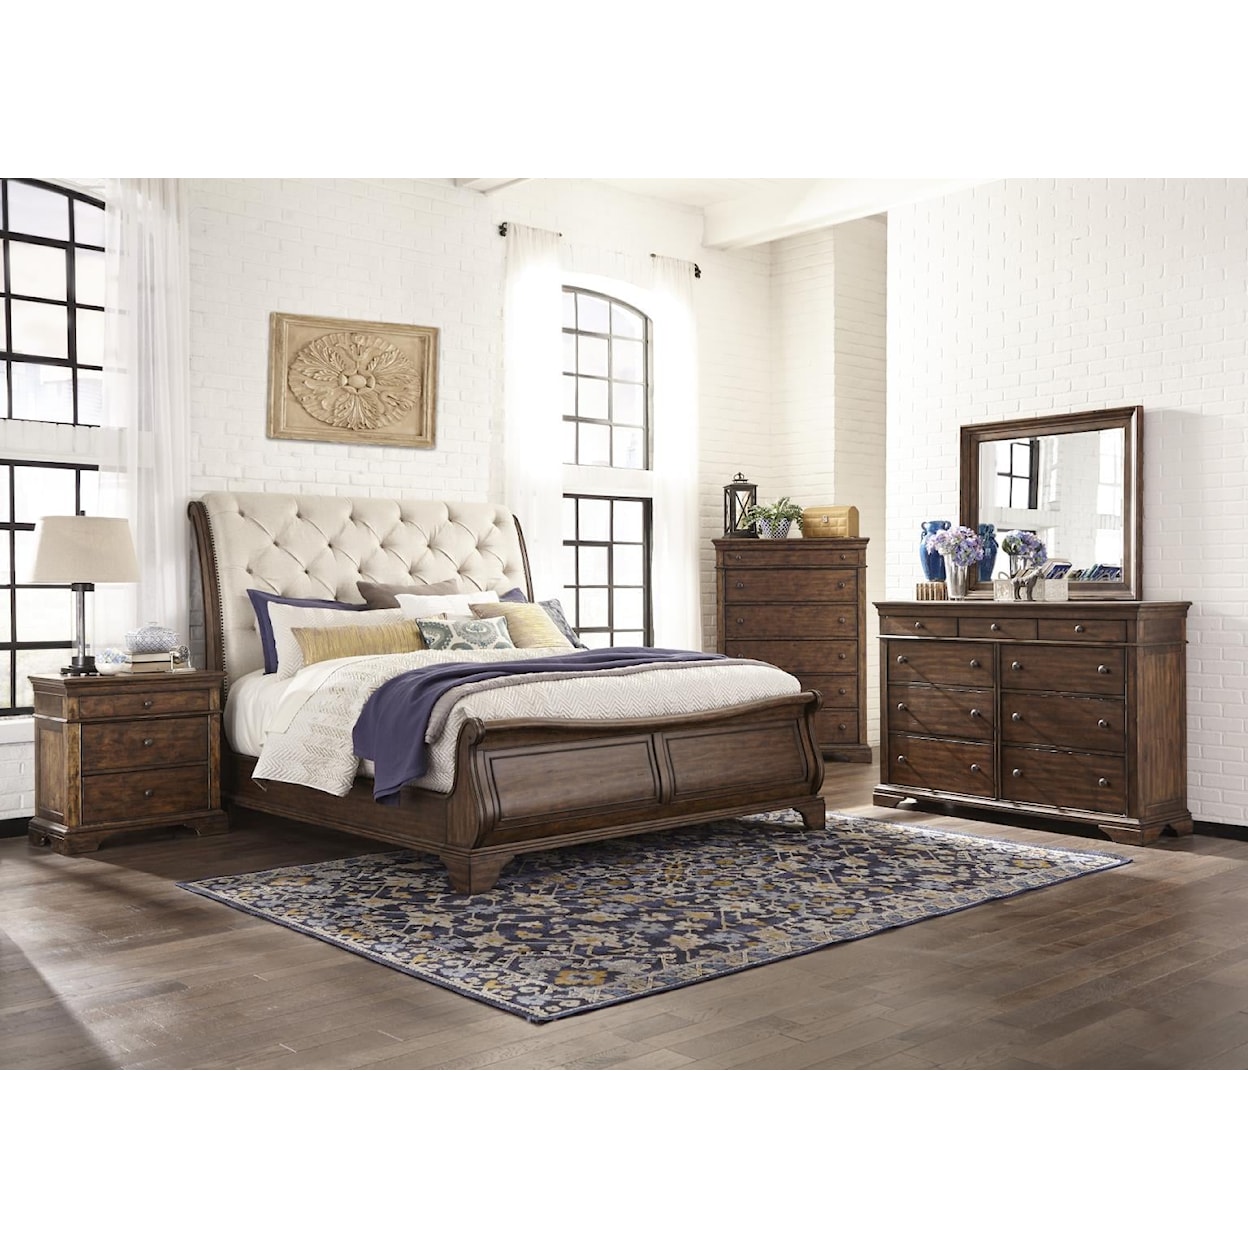 Trisha Yearwood Home Collection by Legacy Classic Trisha Yearwood Home 5-Piece Bedroom Set